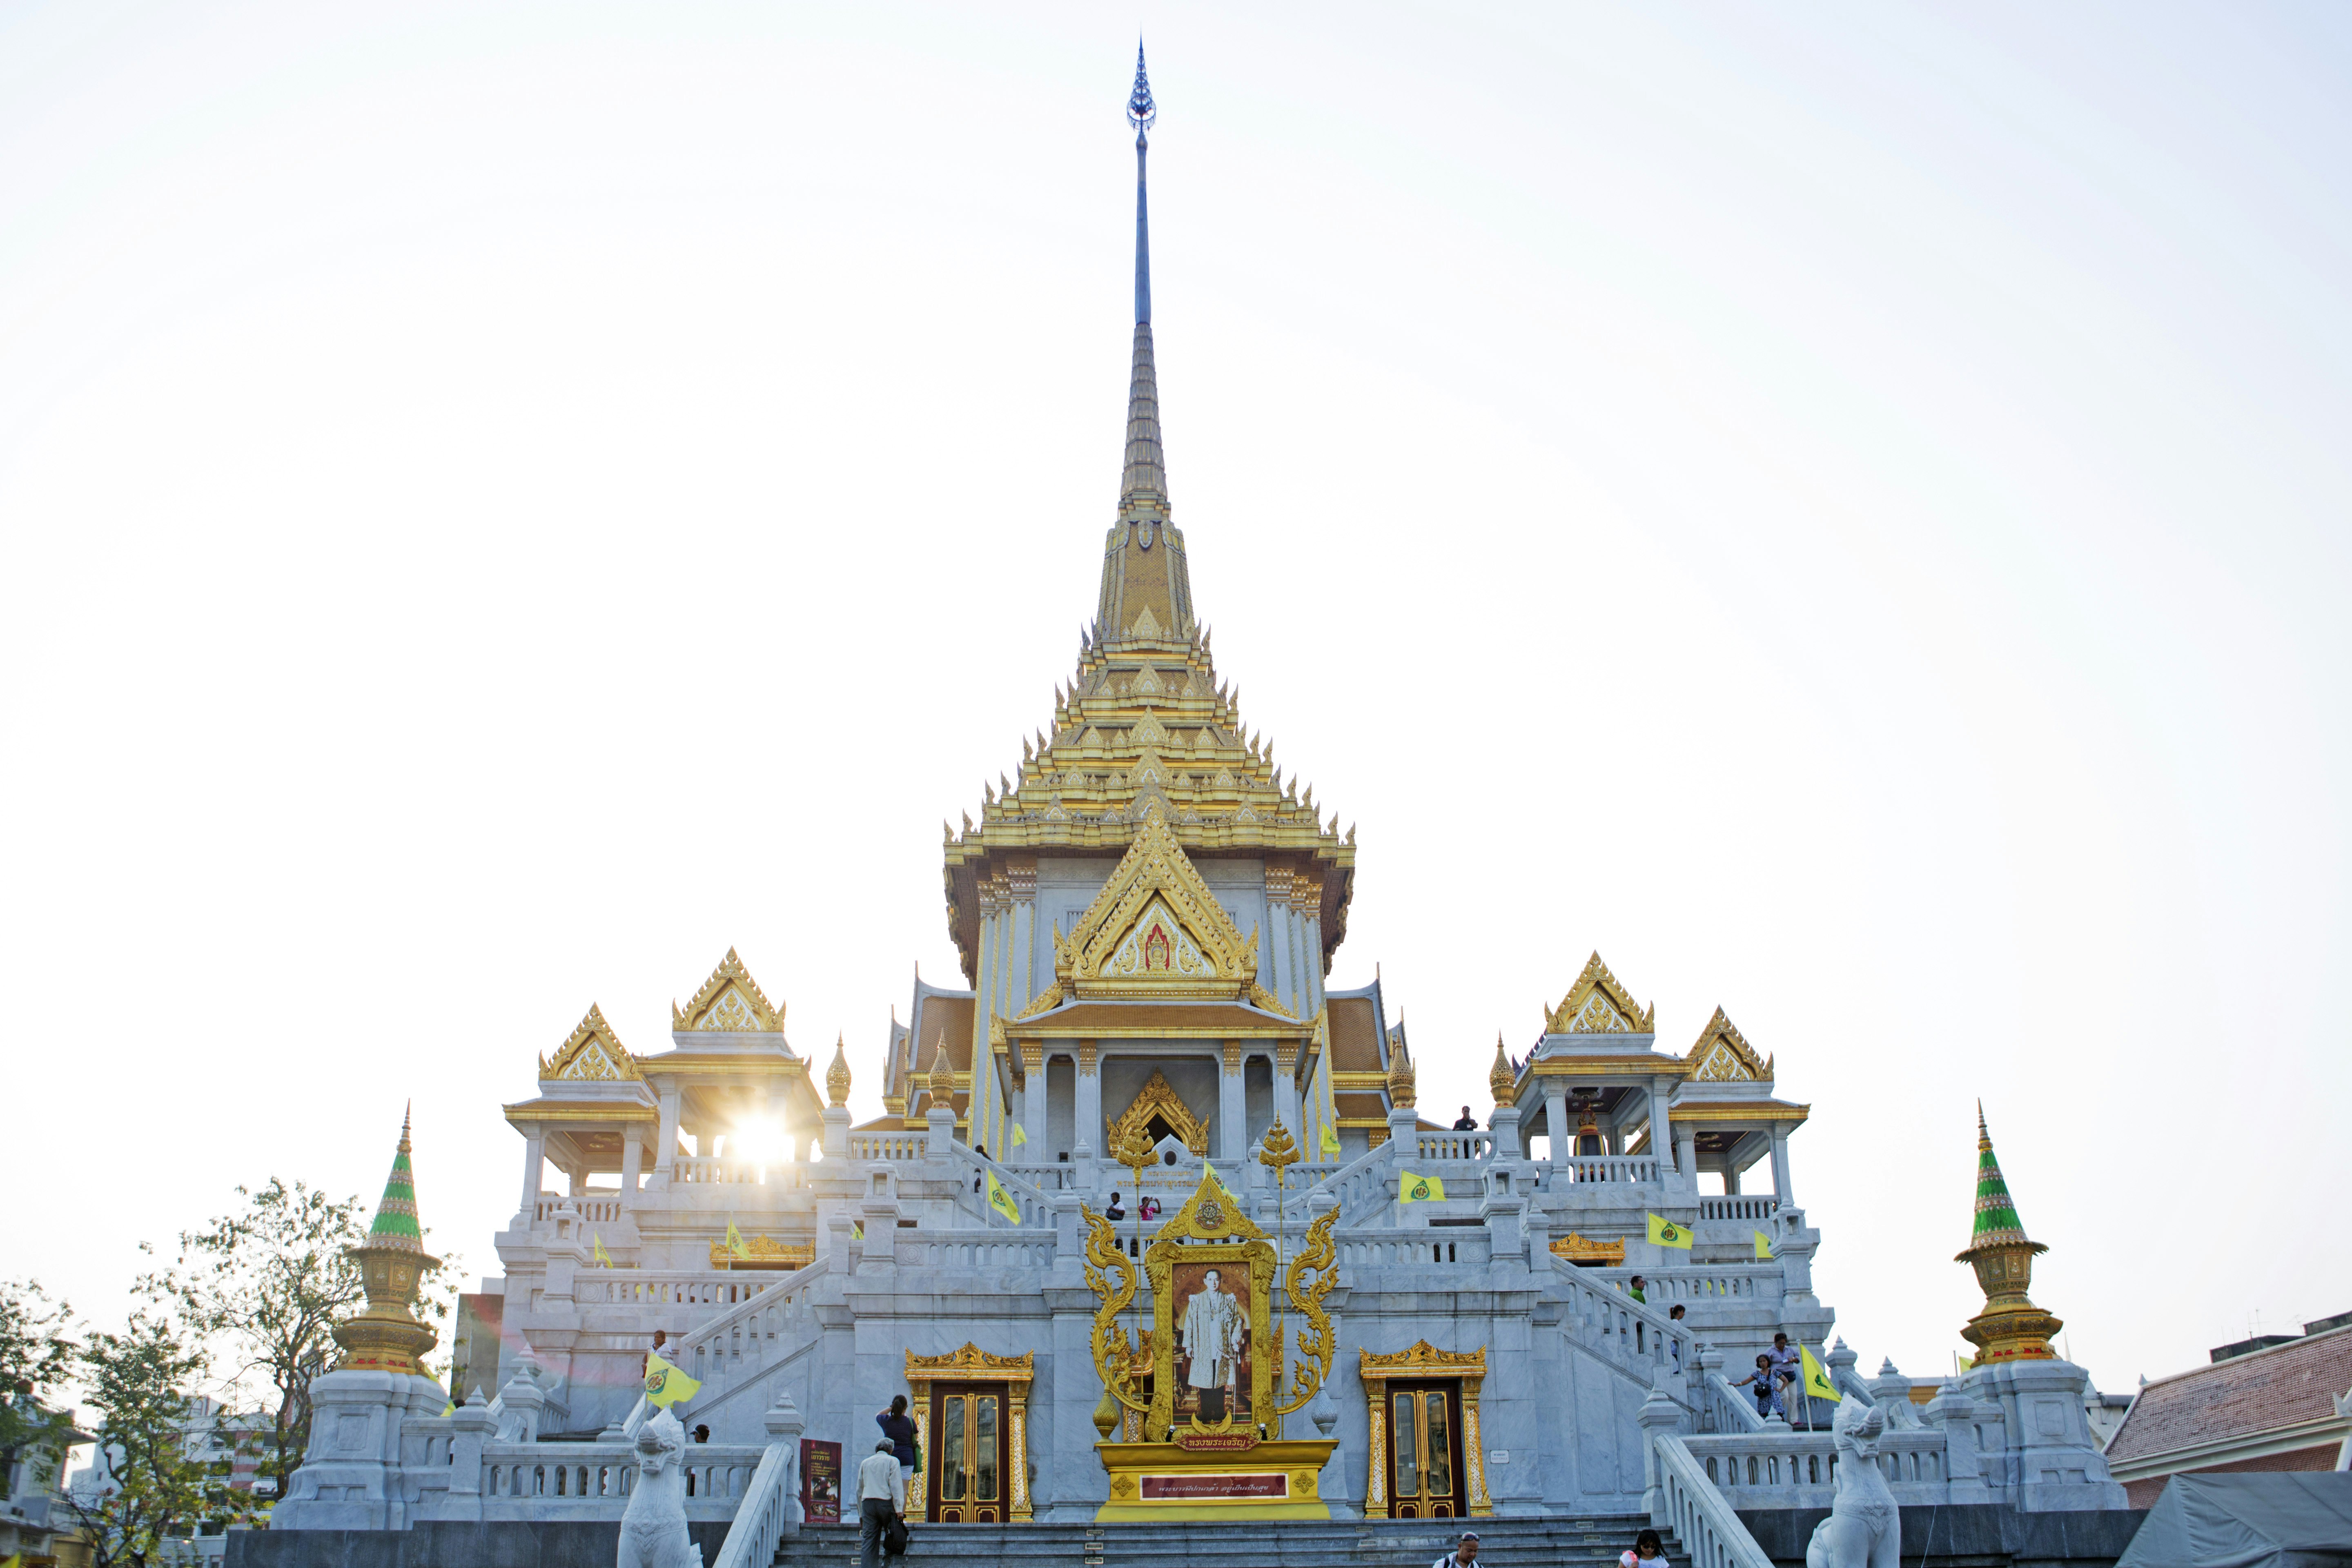 South East Asia, Thailand, Bangkok, Samphanthawong district, Chinatown, Wat Traimit temple which houses the Golden Buddha